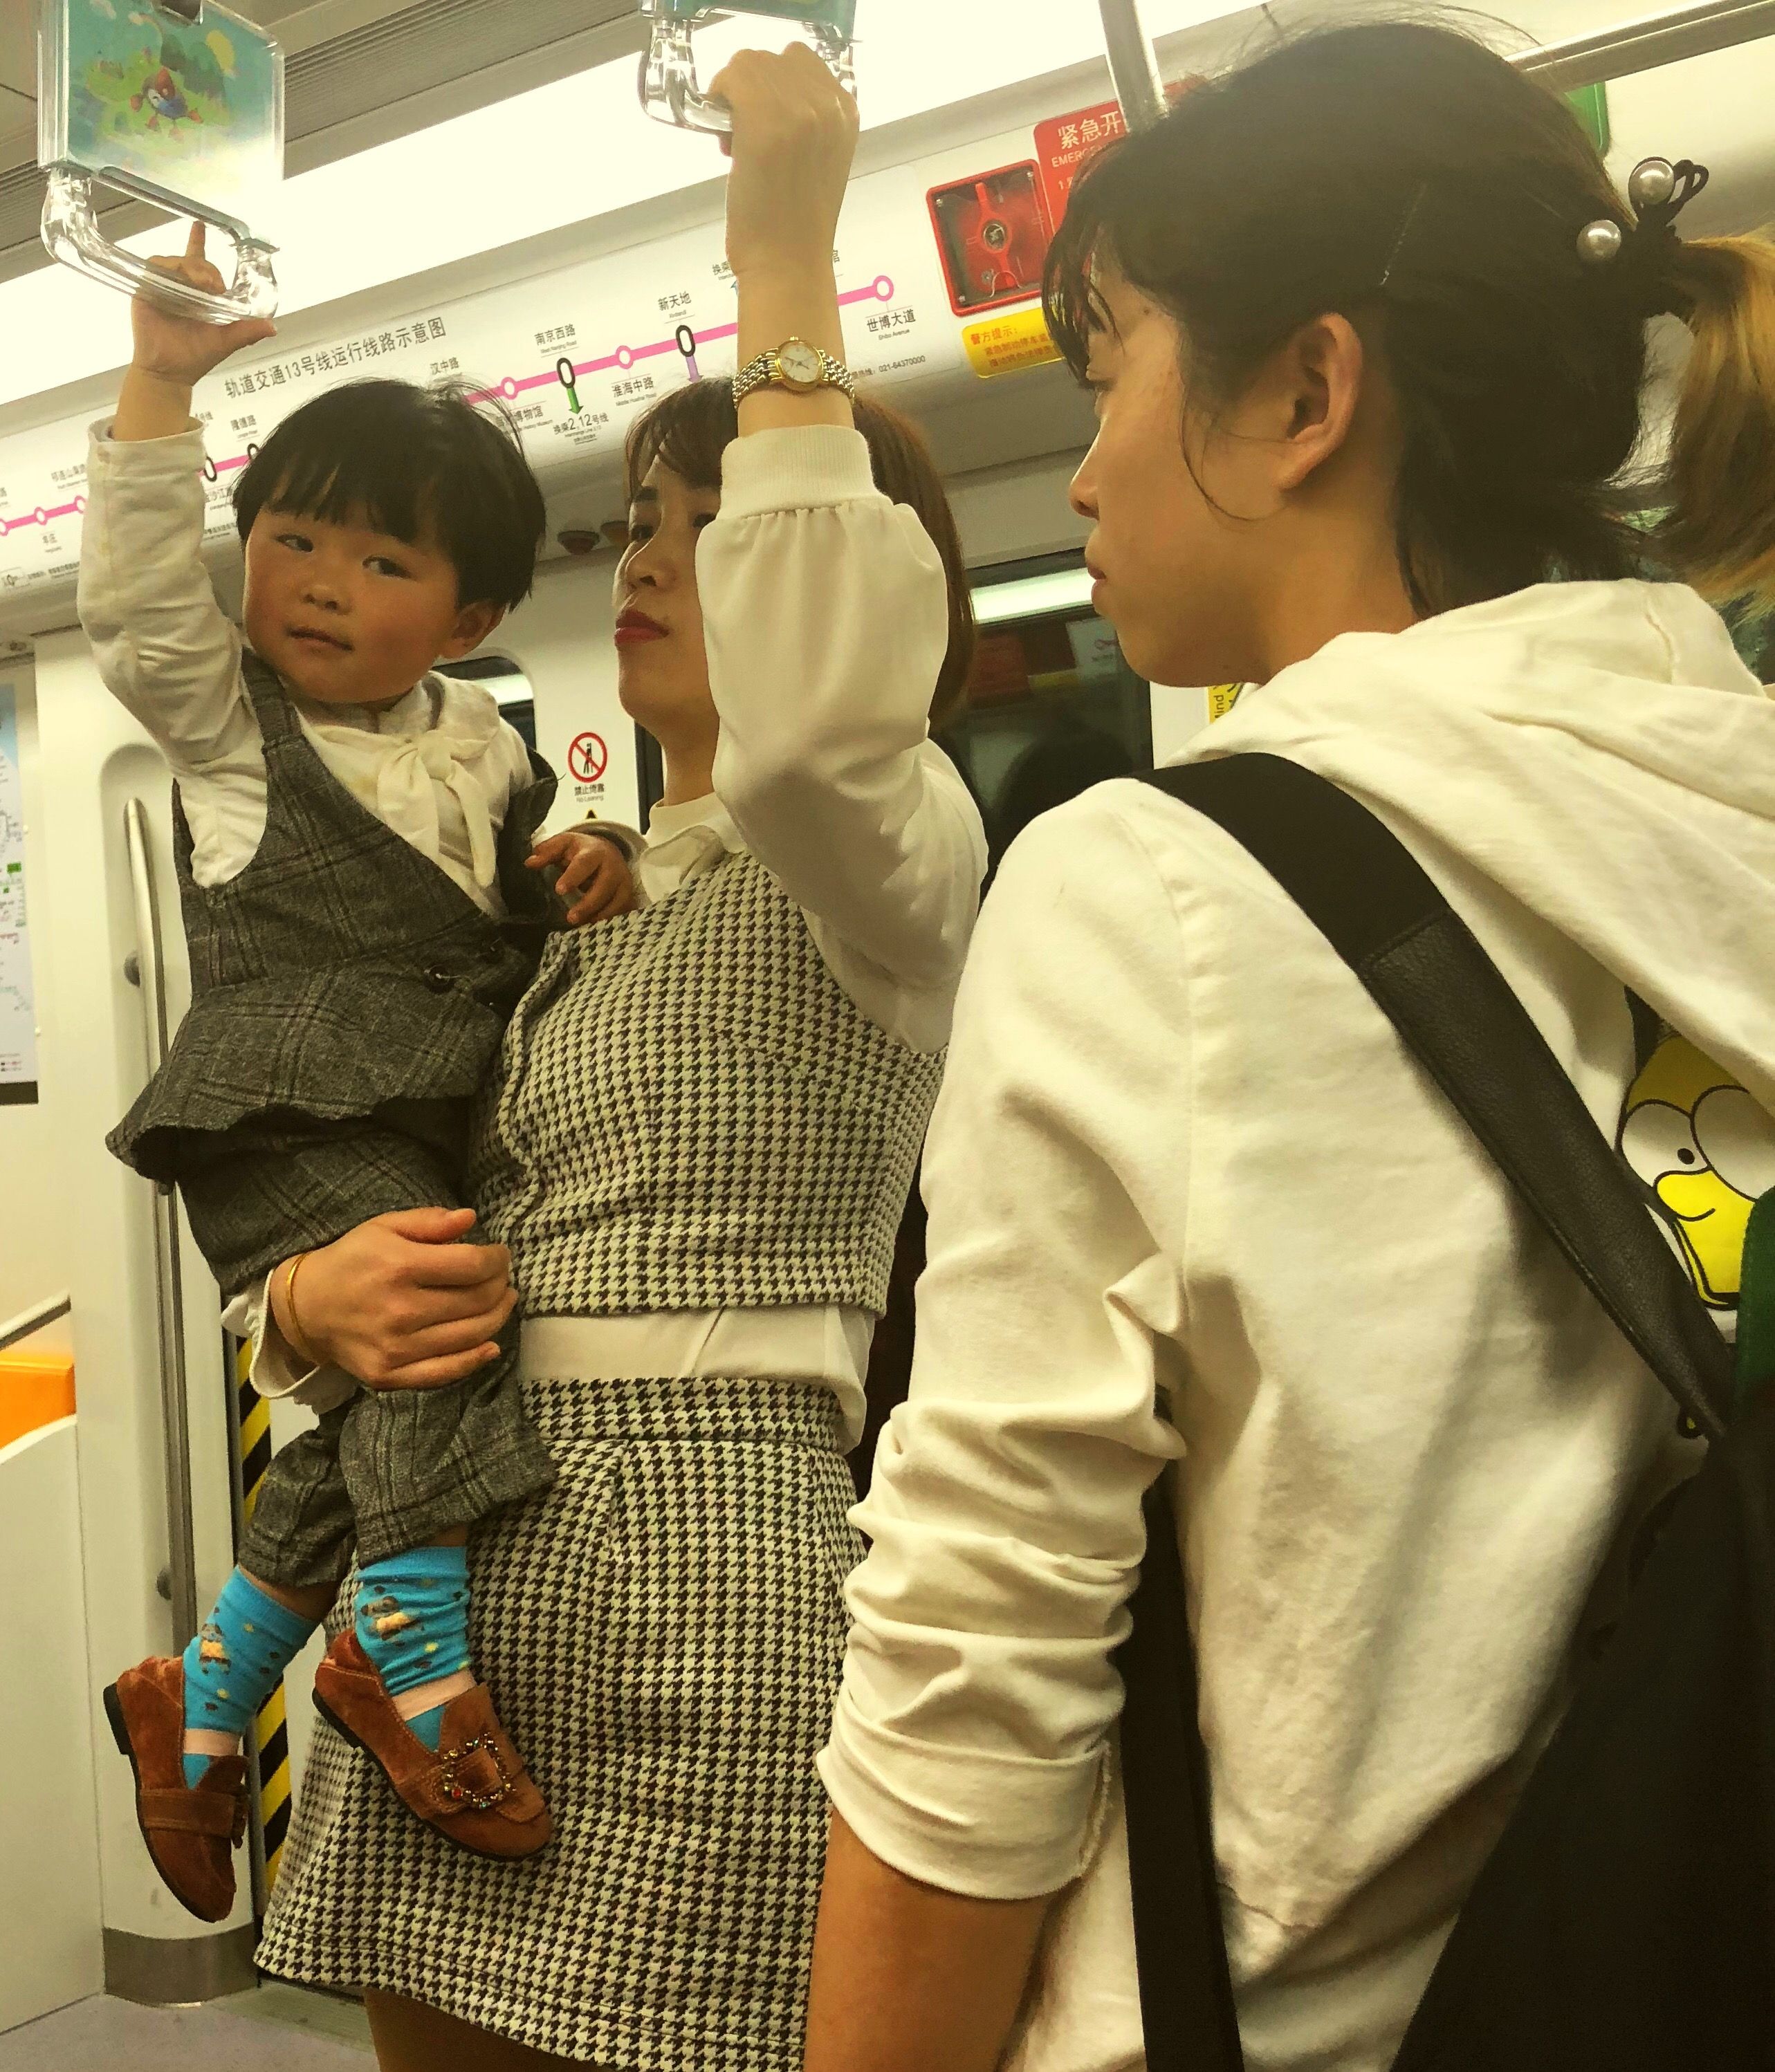 A young woman carrying her son on the train in Shanghai. Image by Argentina Maria-Vanderhorst. China, 2018.